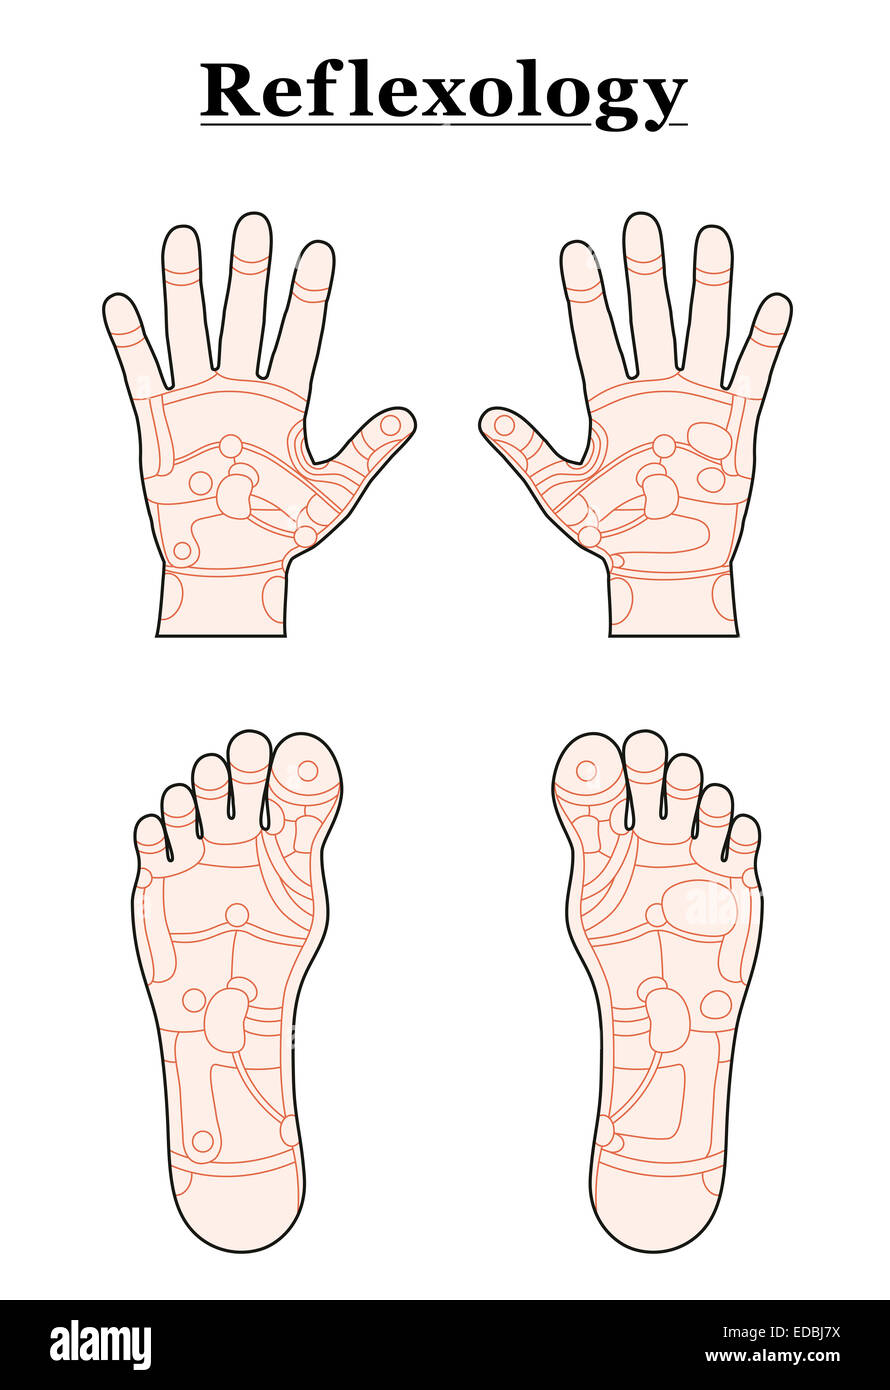 Hands and feet divided into the reflexology areas of the corresponding internal organs and body parts. Stock Photo